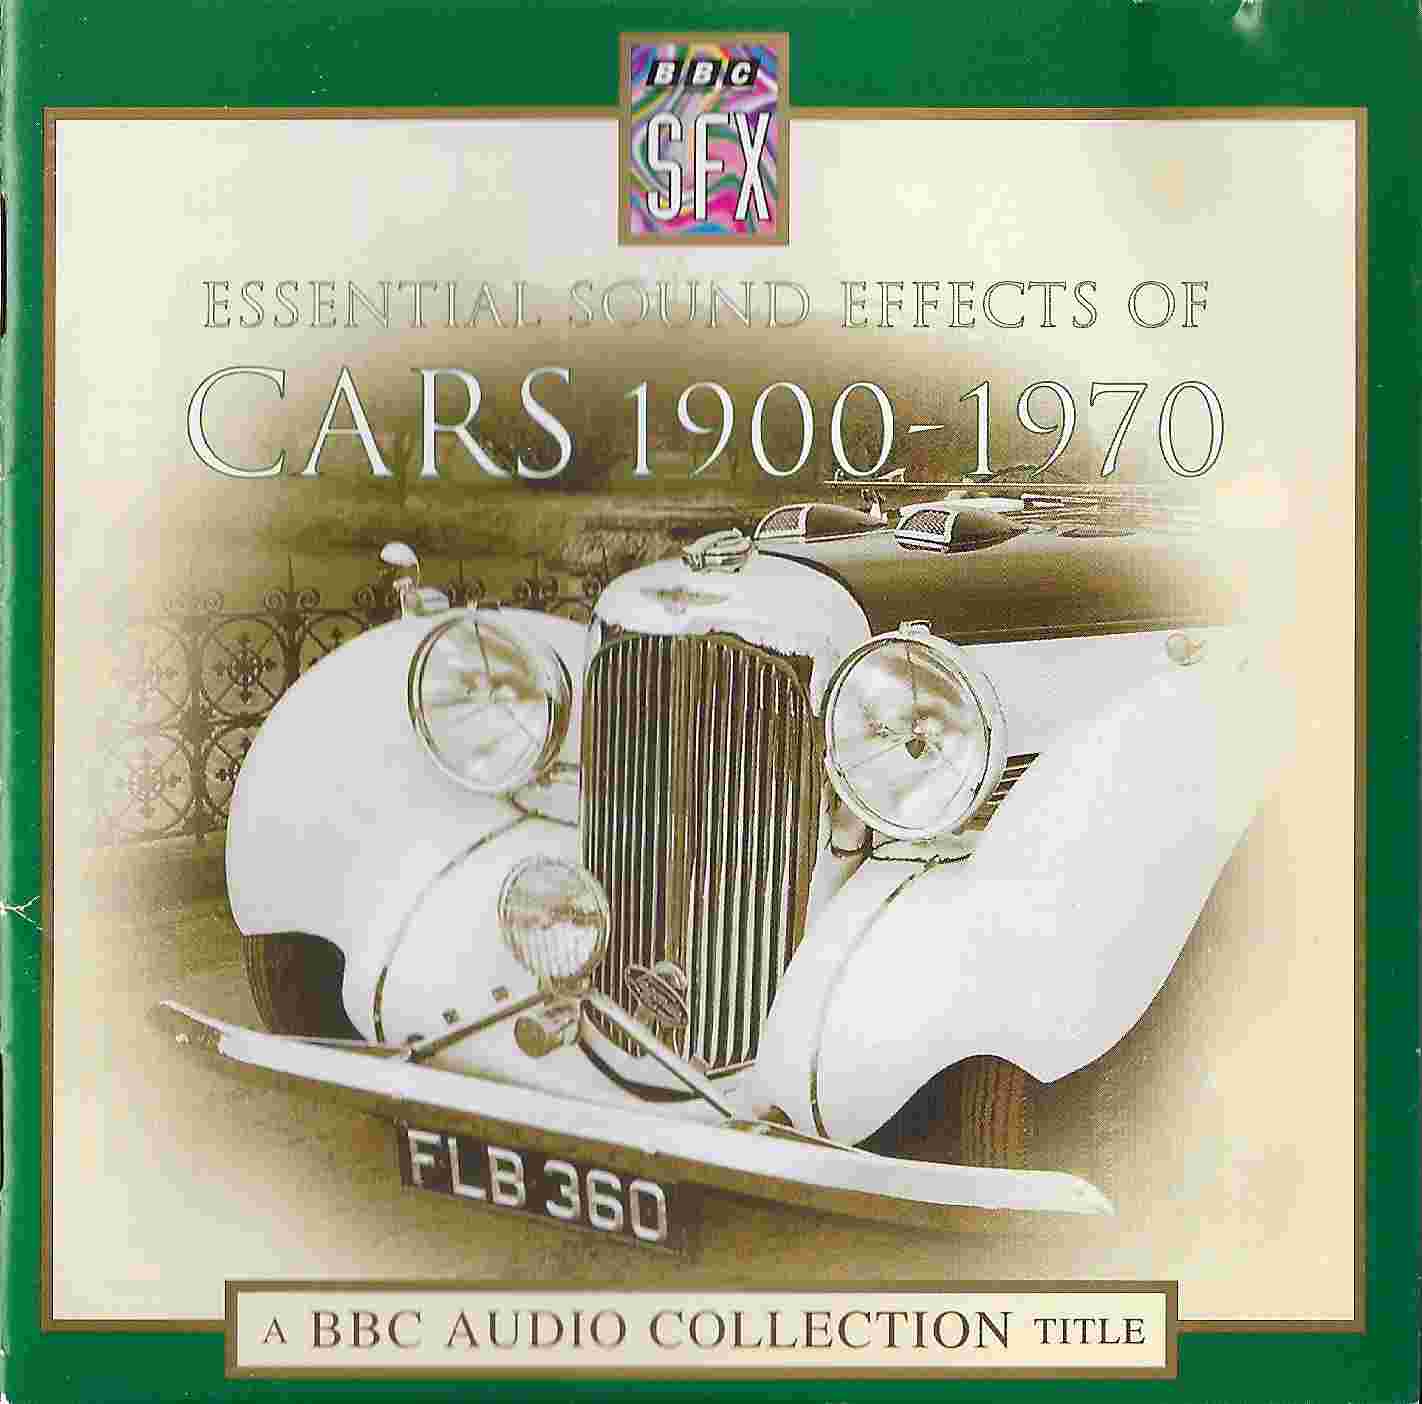 Picture of BBCCD874 Essential sound effects of cars 1900 - 1970 by artist Various from the BBC records and Tapes library